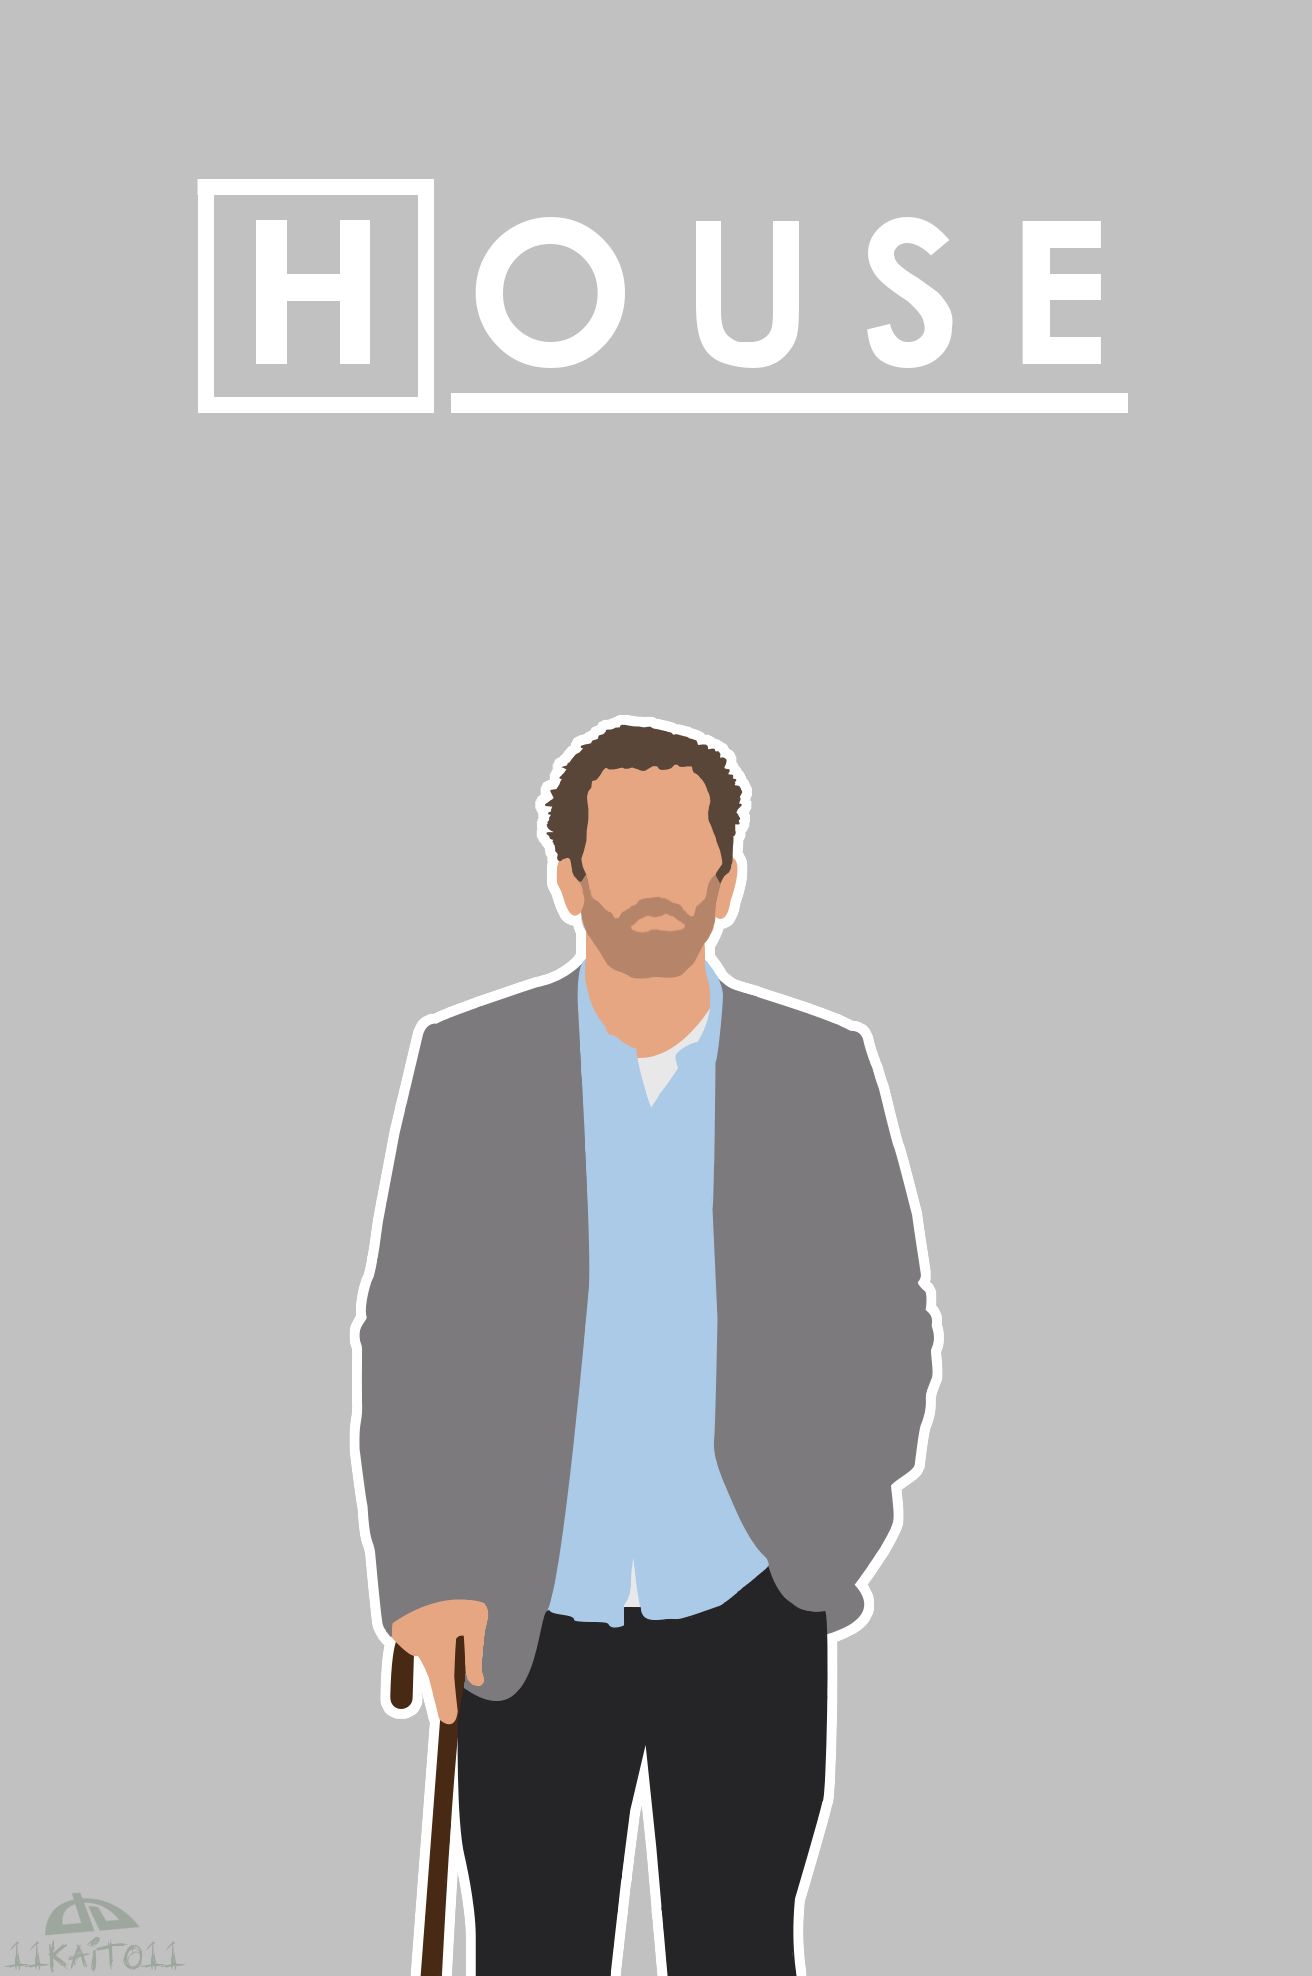 Dr. House (Wallpaper 16) #, #DrHouse, #House, #Wallpaper. Dr house, Gregory house, House md funny